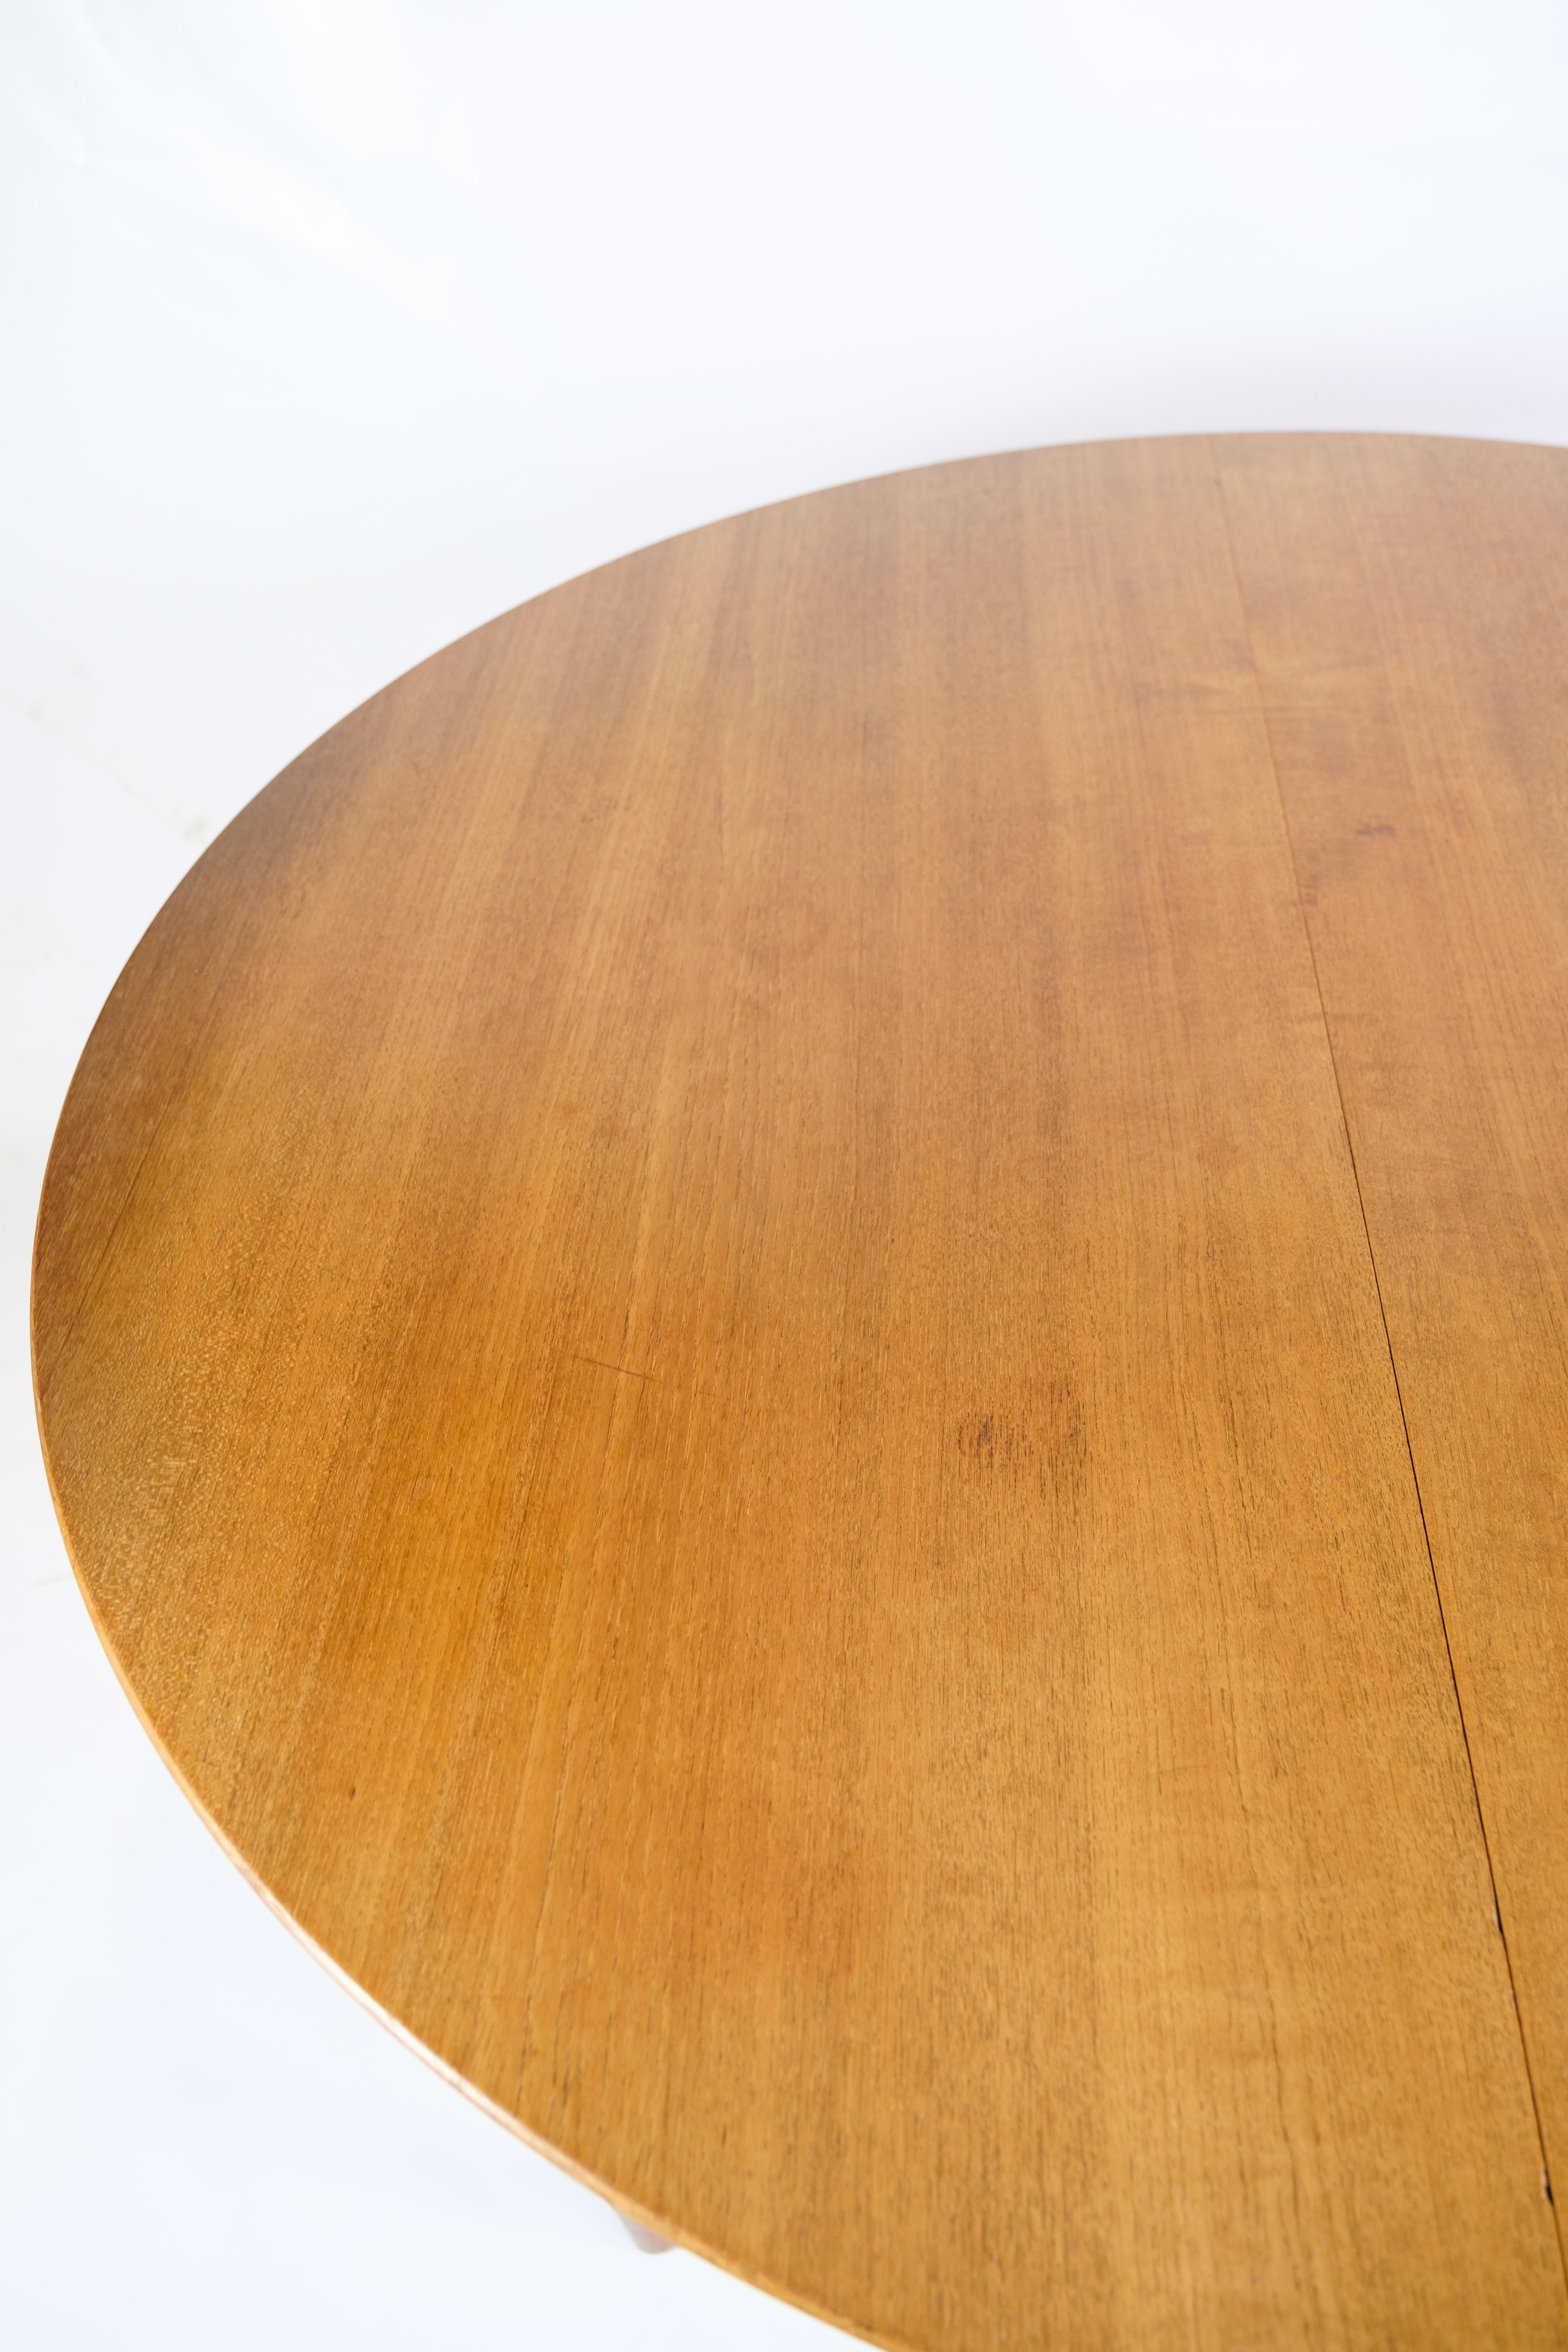 Mid-Century Modern Dining Room Table Made In Teak With Extensions By Arne Vodder From 1960s For Sale